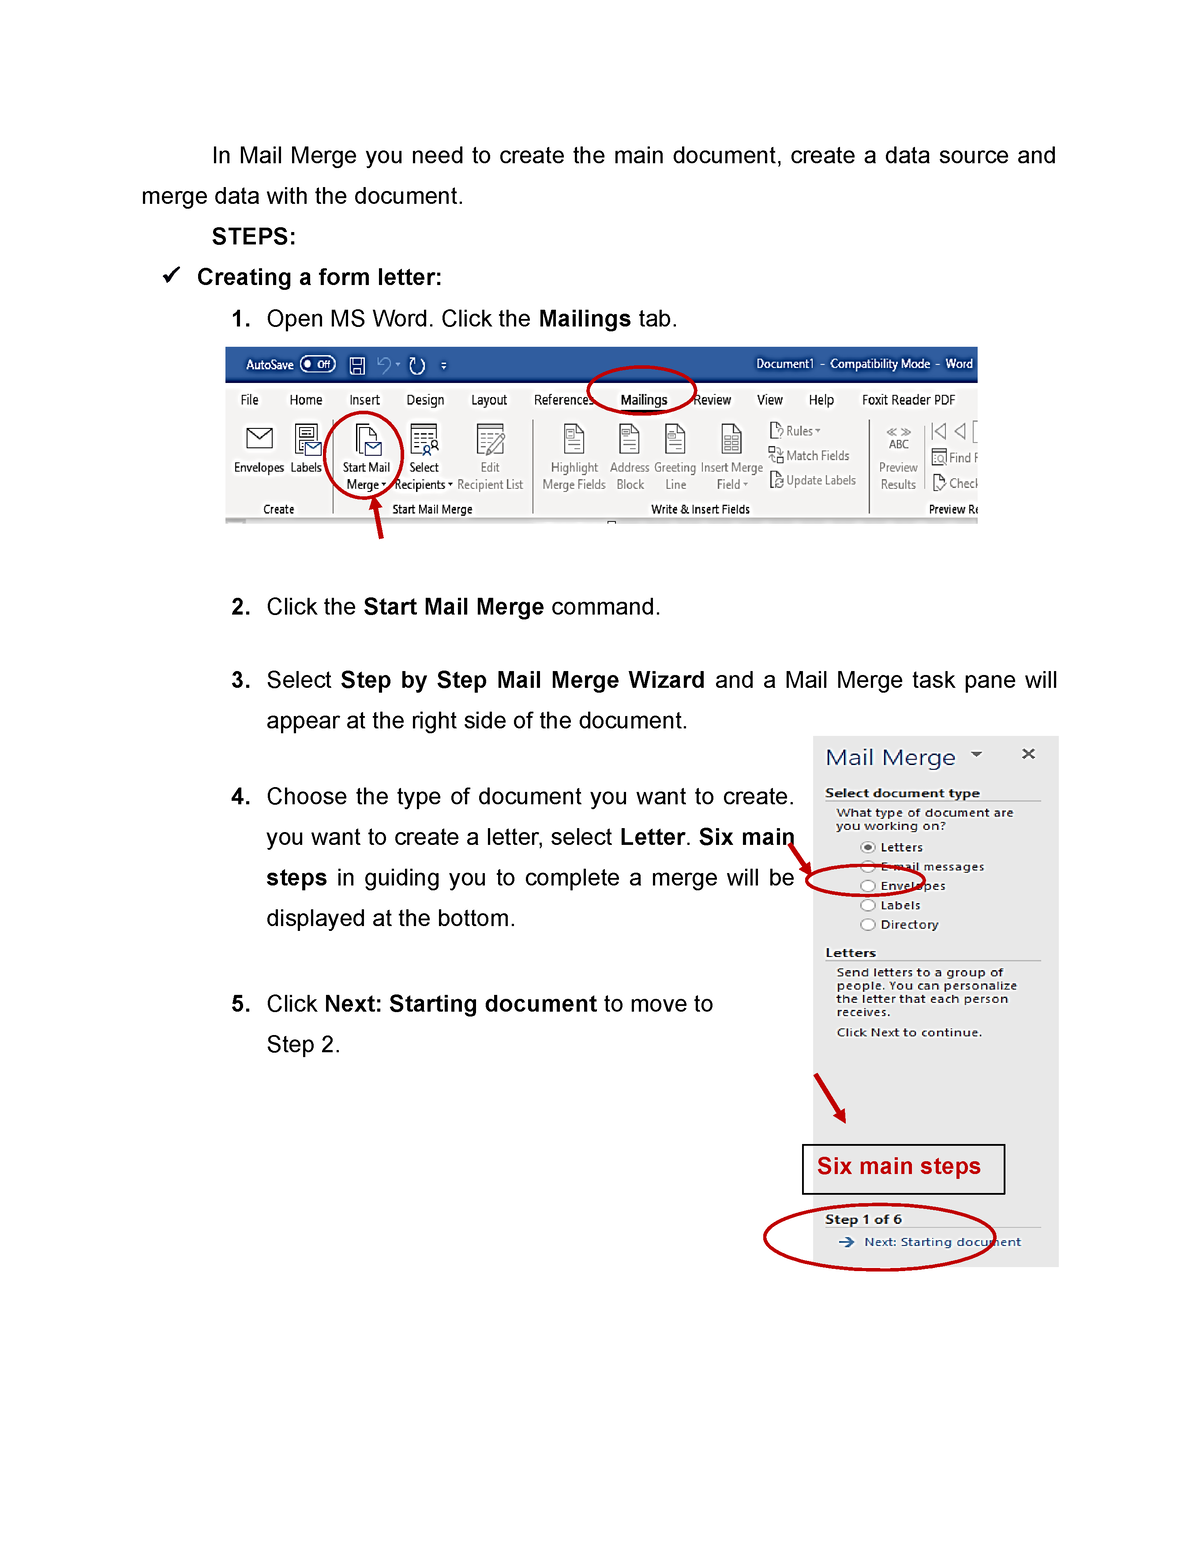 Mail Merge Steps Sample For Reference In Mail Merge You Need To Create The Main Document 2119